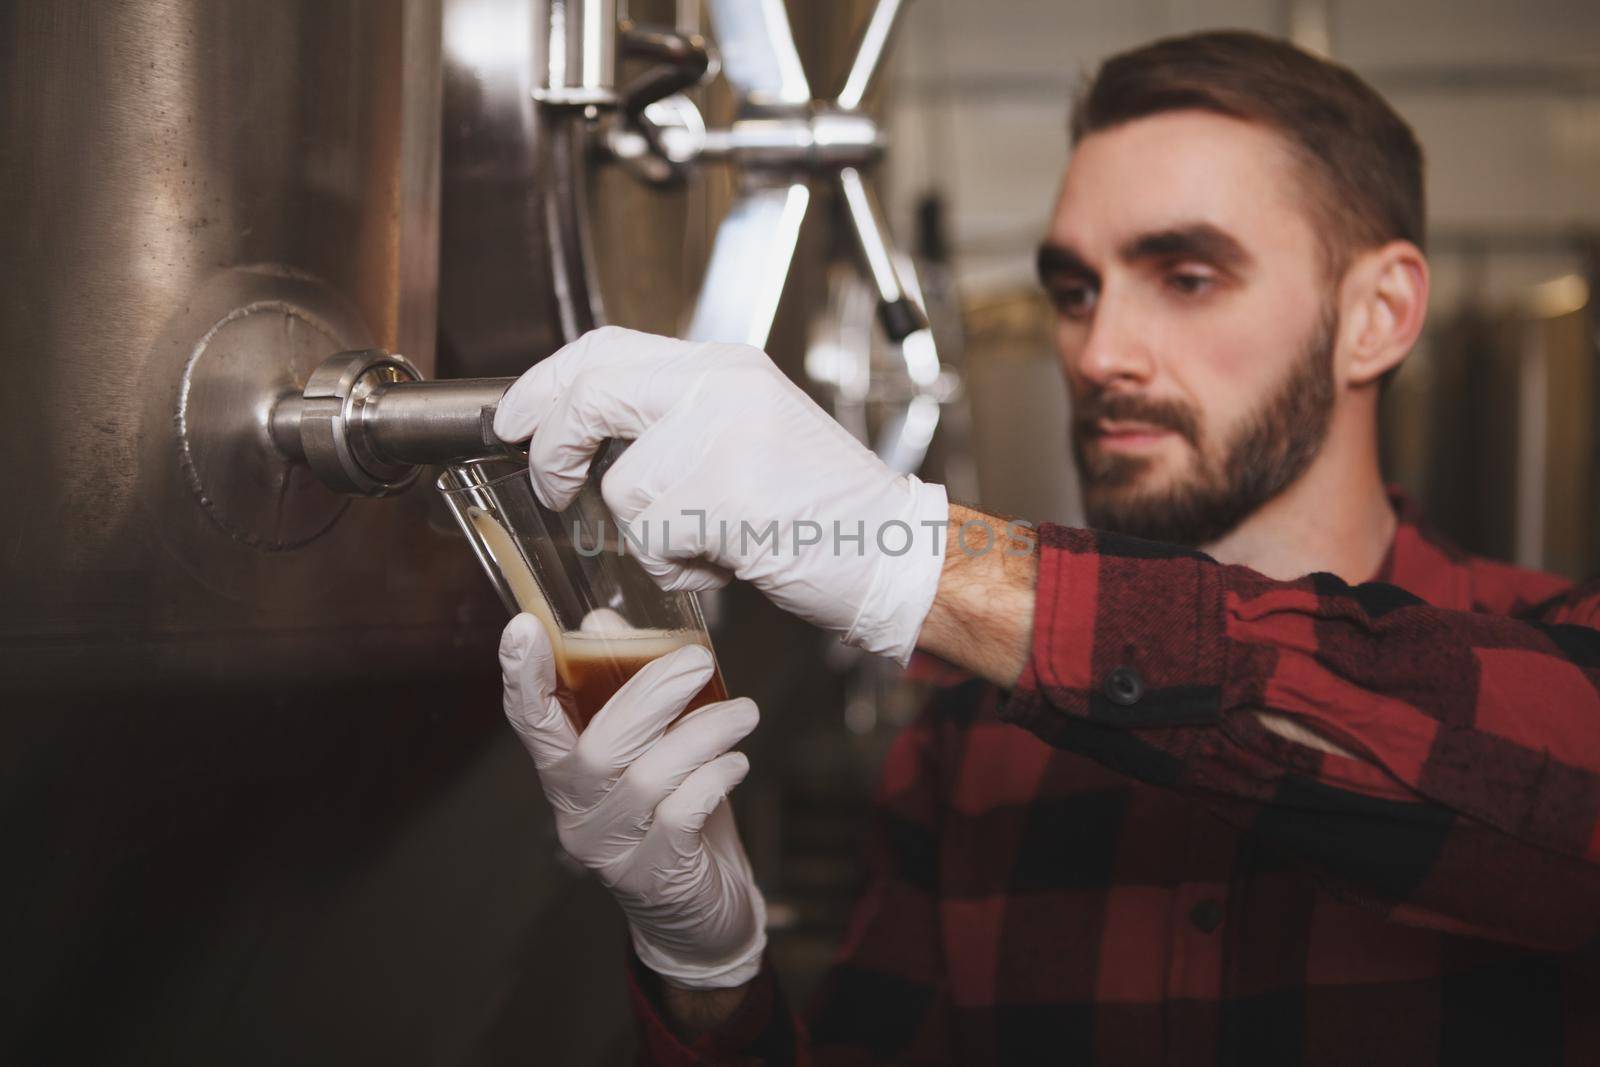 Professional brewer pouring beer into glass from beer tank at his brewery